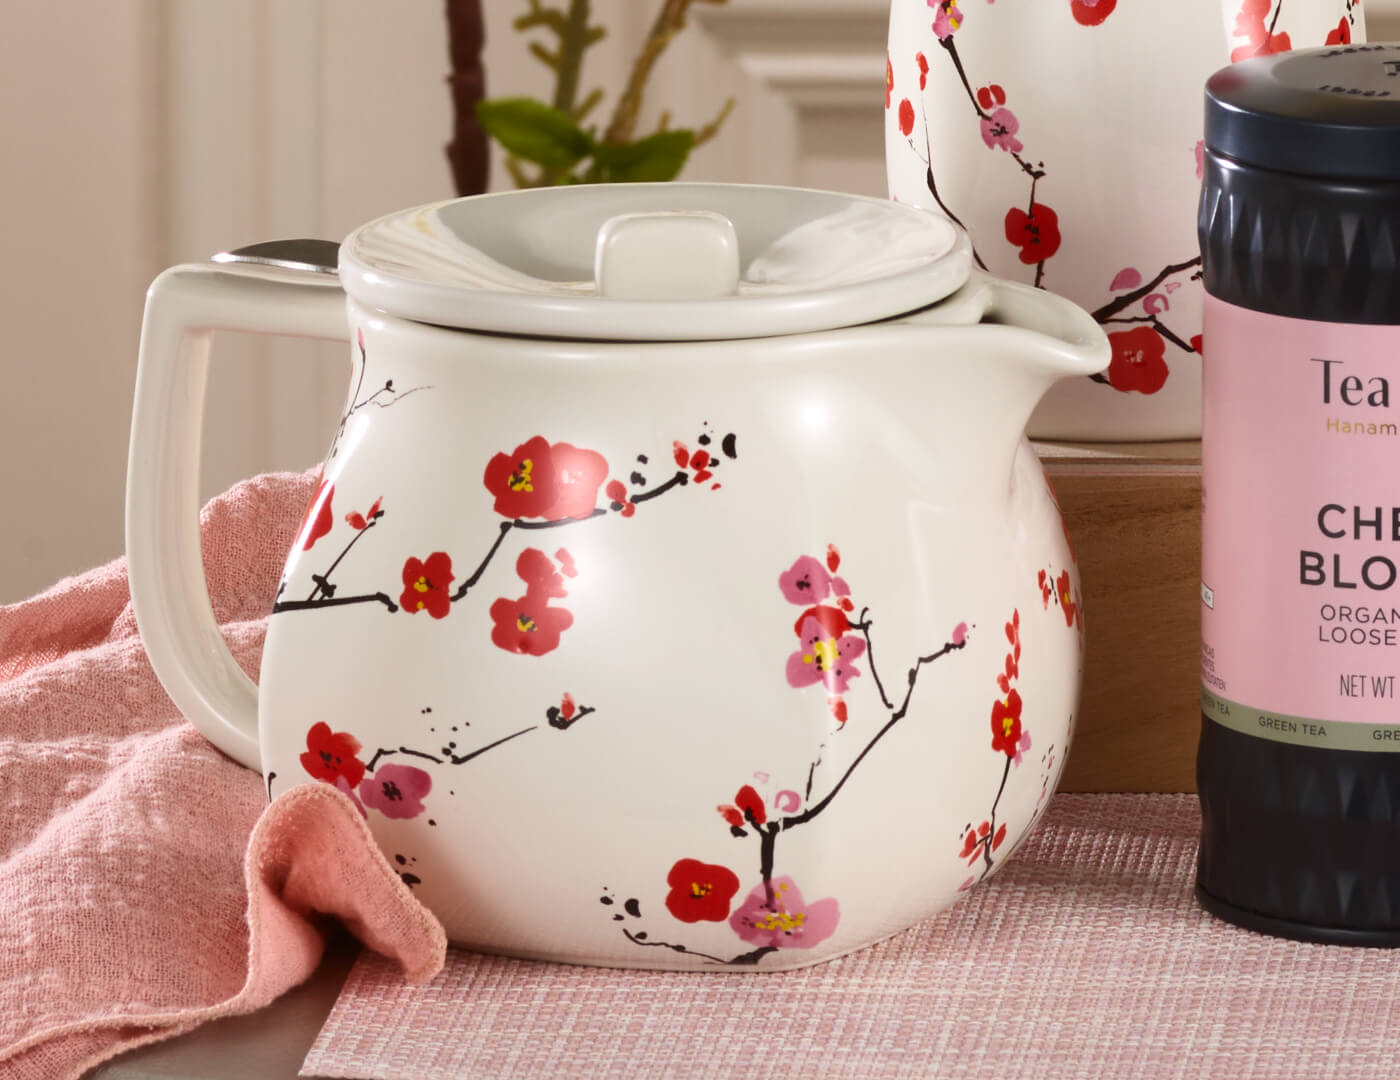 Fiore Sakura Teapot resting on table with pink cloth and Cherry Blossom loose leaf tea